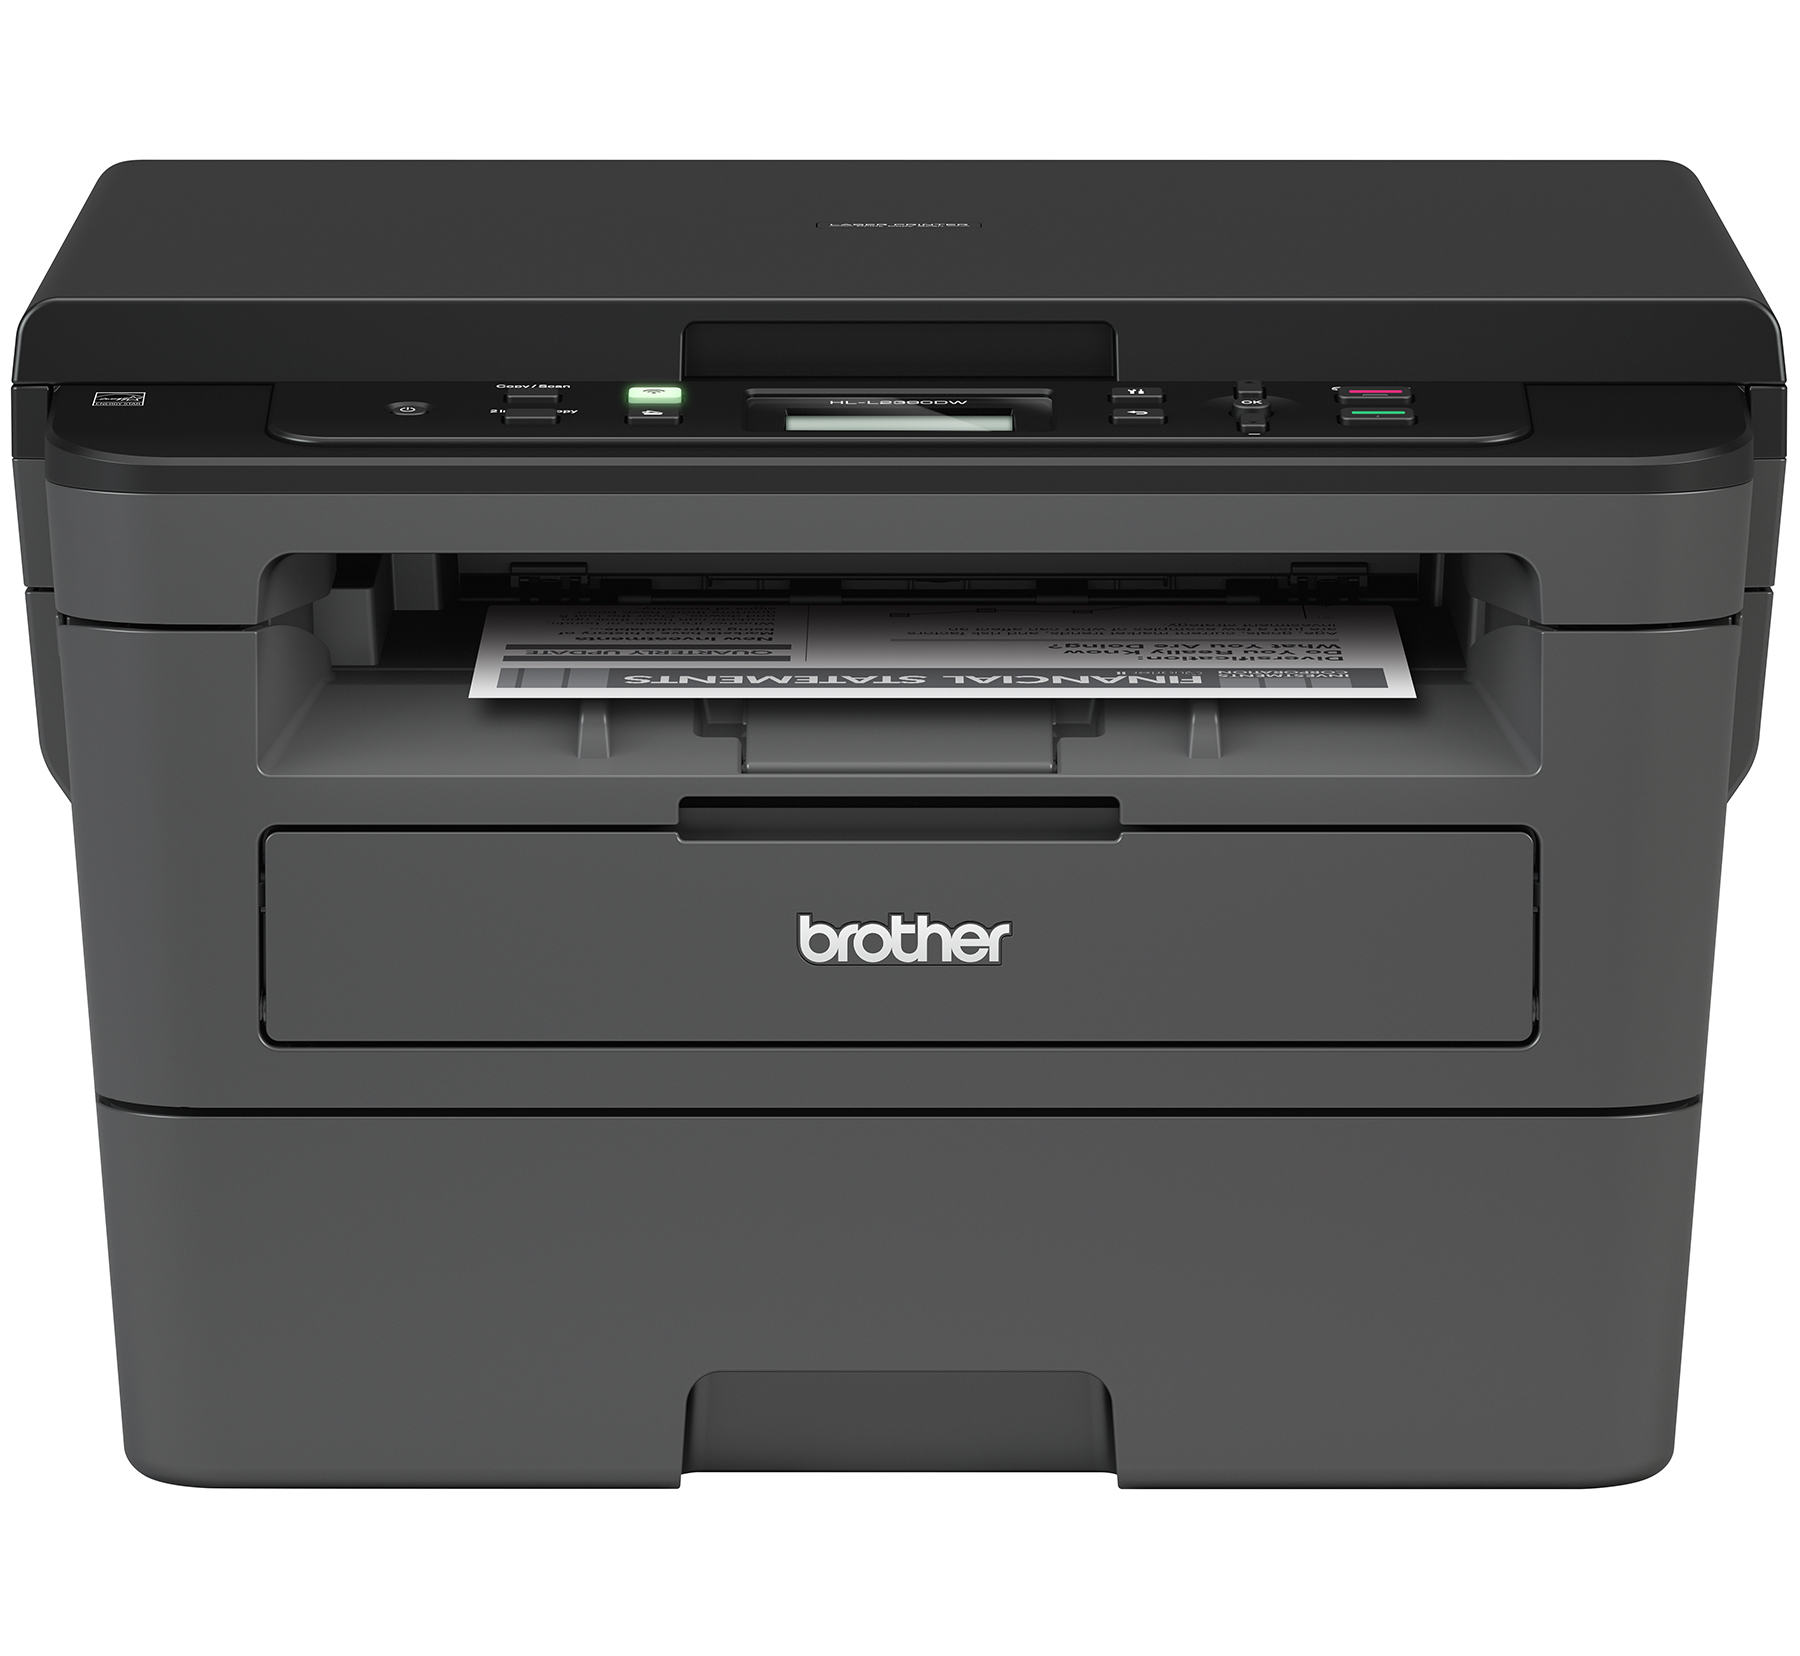 Brother HL-L2390DW Monochrome Laser Printer with Flatbed Copy & Scan, Duplex Printing, Wireless - image 1 of 9